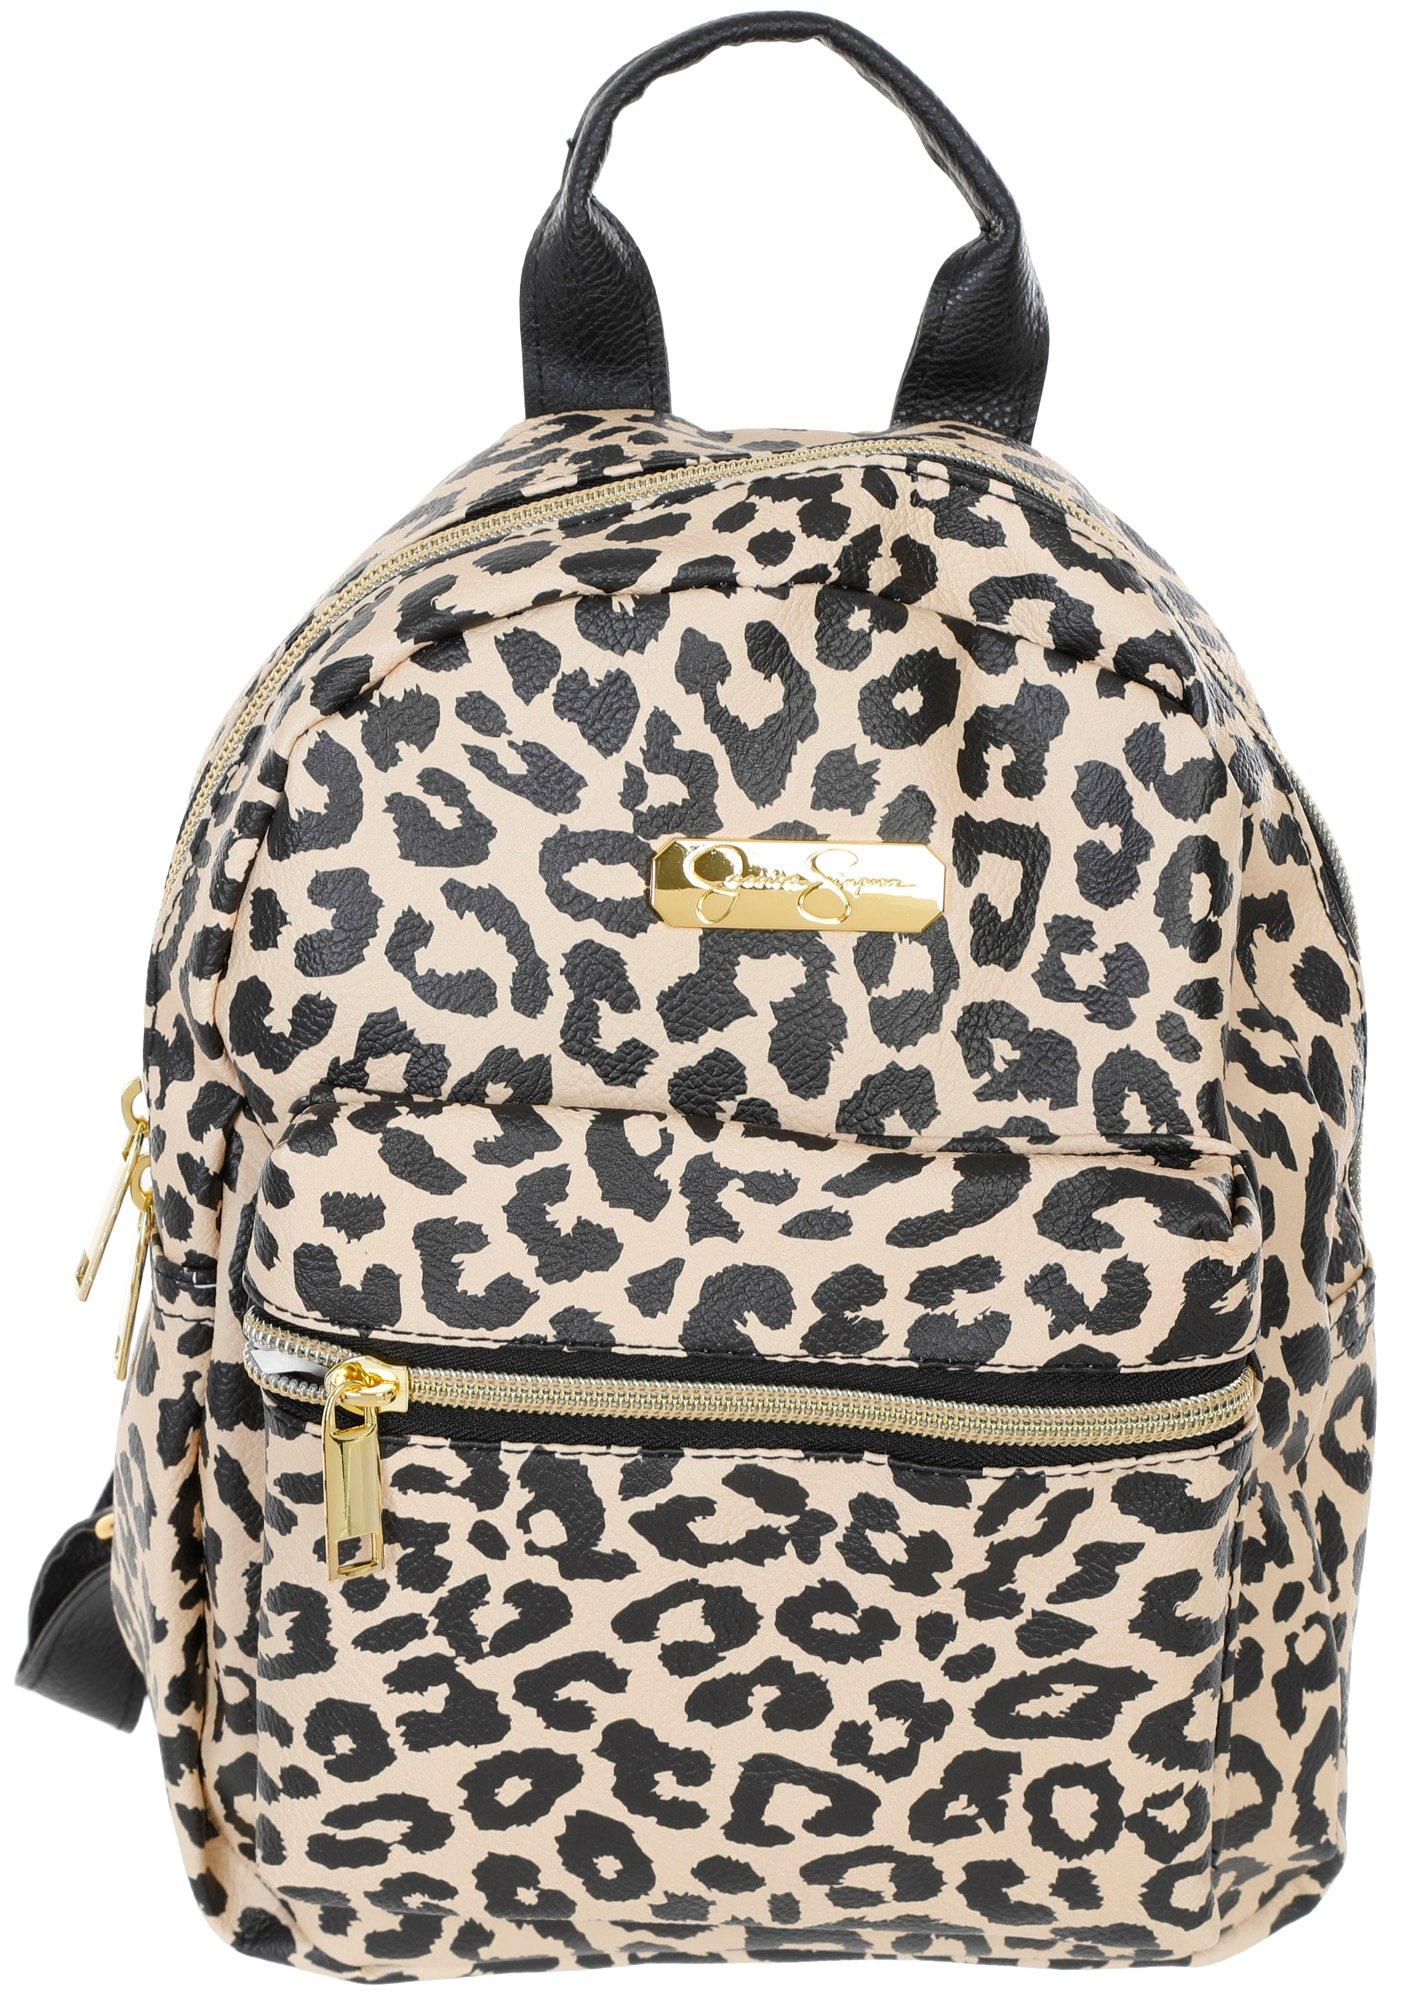 Under One Sky Girl's Cat Faux Leather Backpack In Black